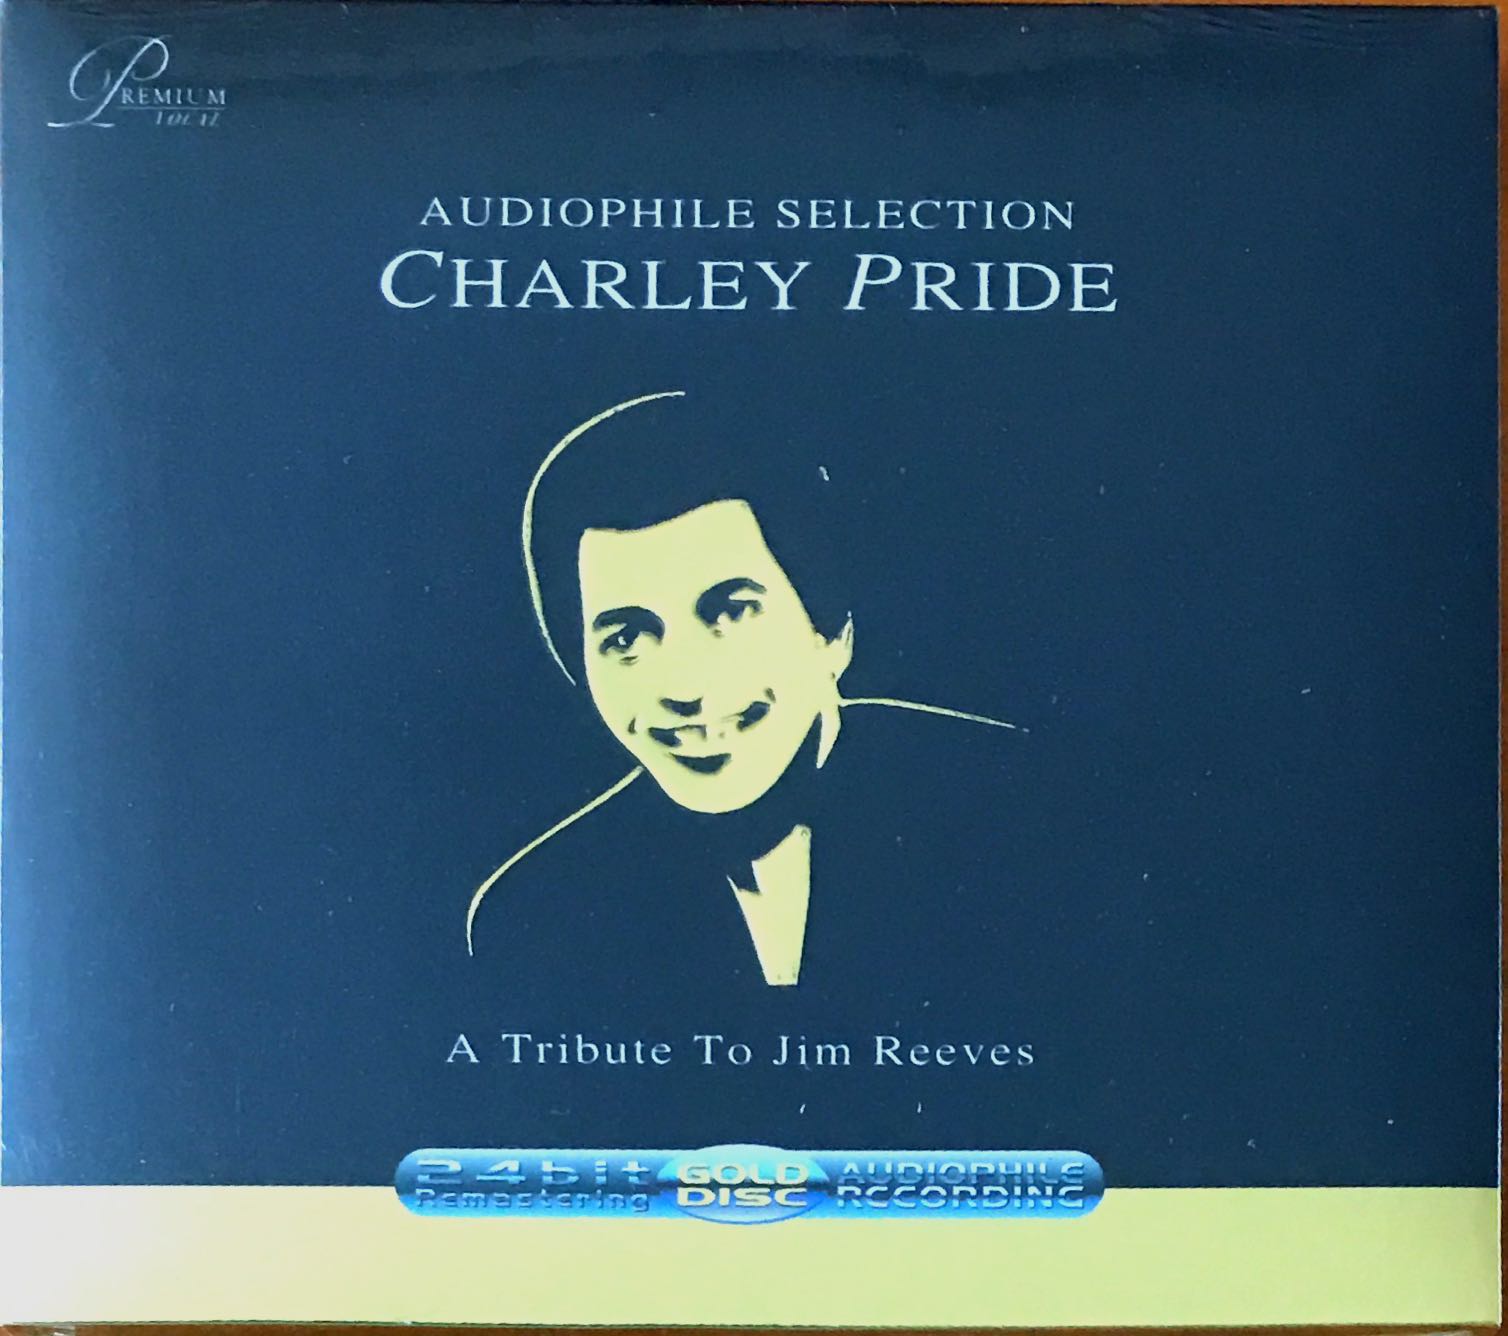 Charley Pride - AUDIOPHILE SELECTION - A Tribute To Jim Reeves 24Bit Remastering CD